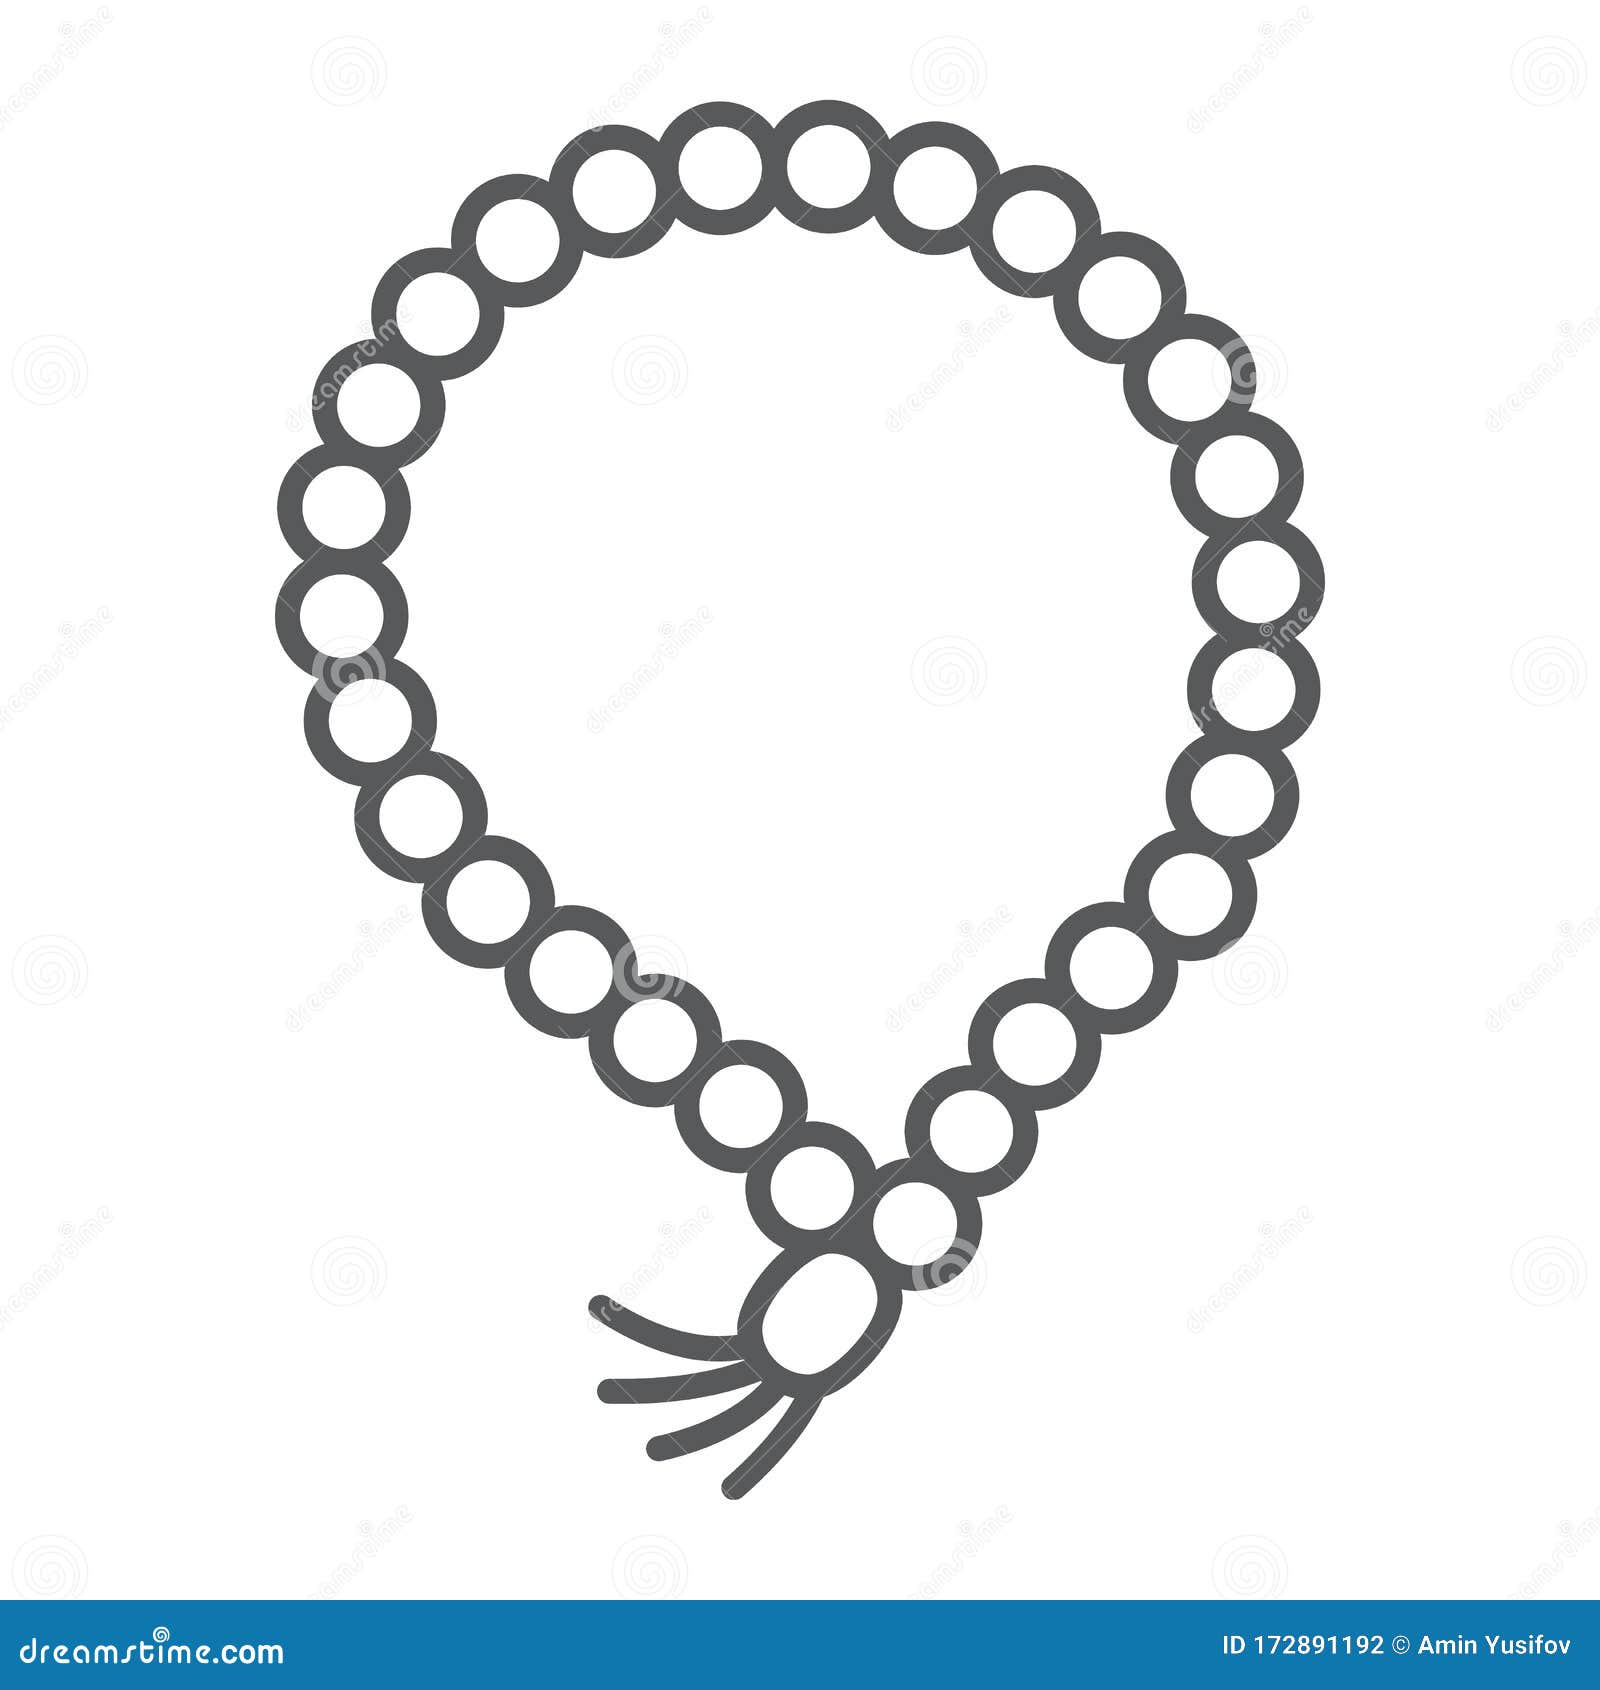 misbaha thin line icon, ramadan and dhikr, muslim tasbih sign,  graphics, a linear pattern on a white background